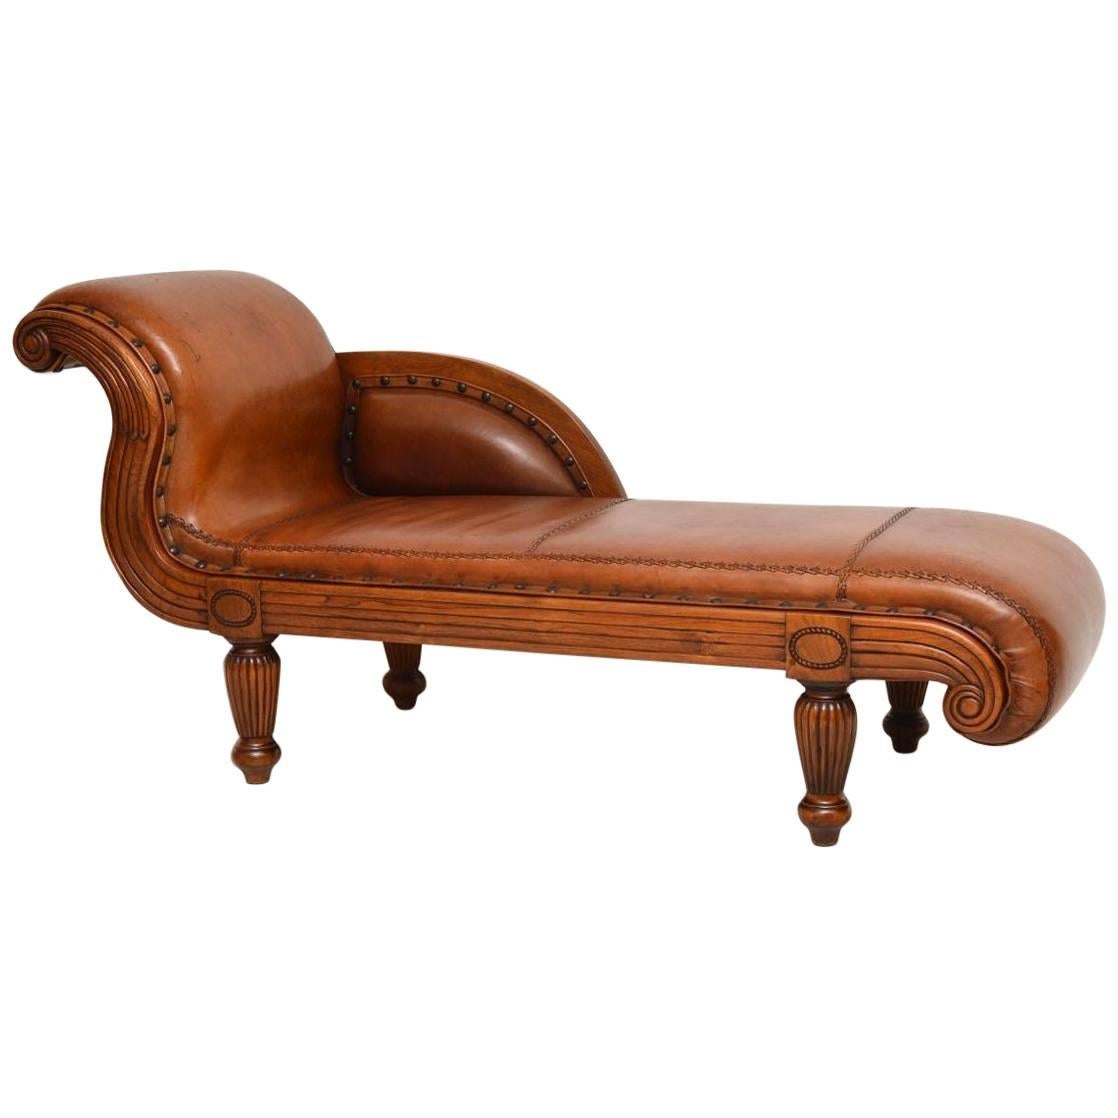 Antique Swedish Regency Leather and Walnut Chaise Longue